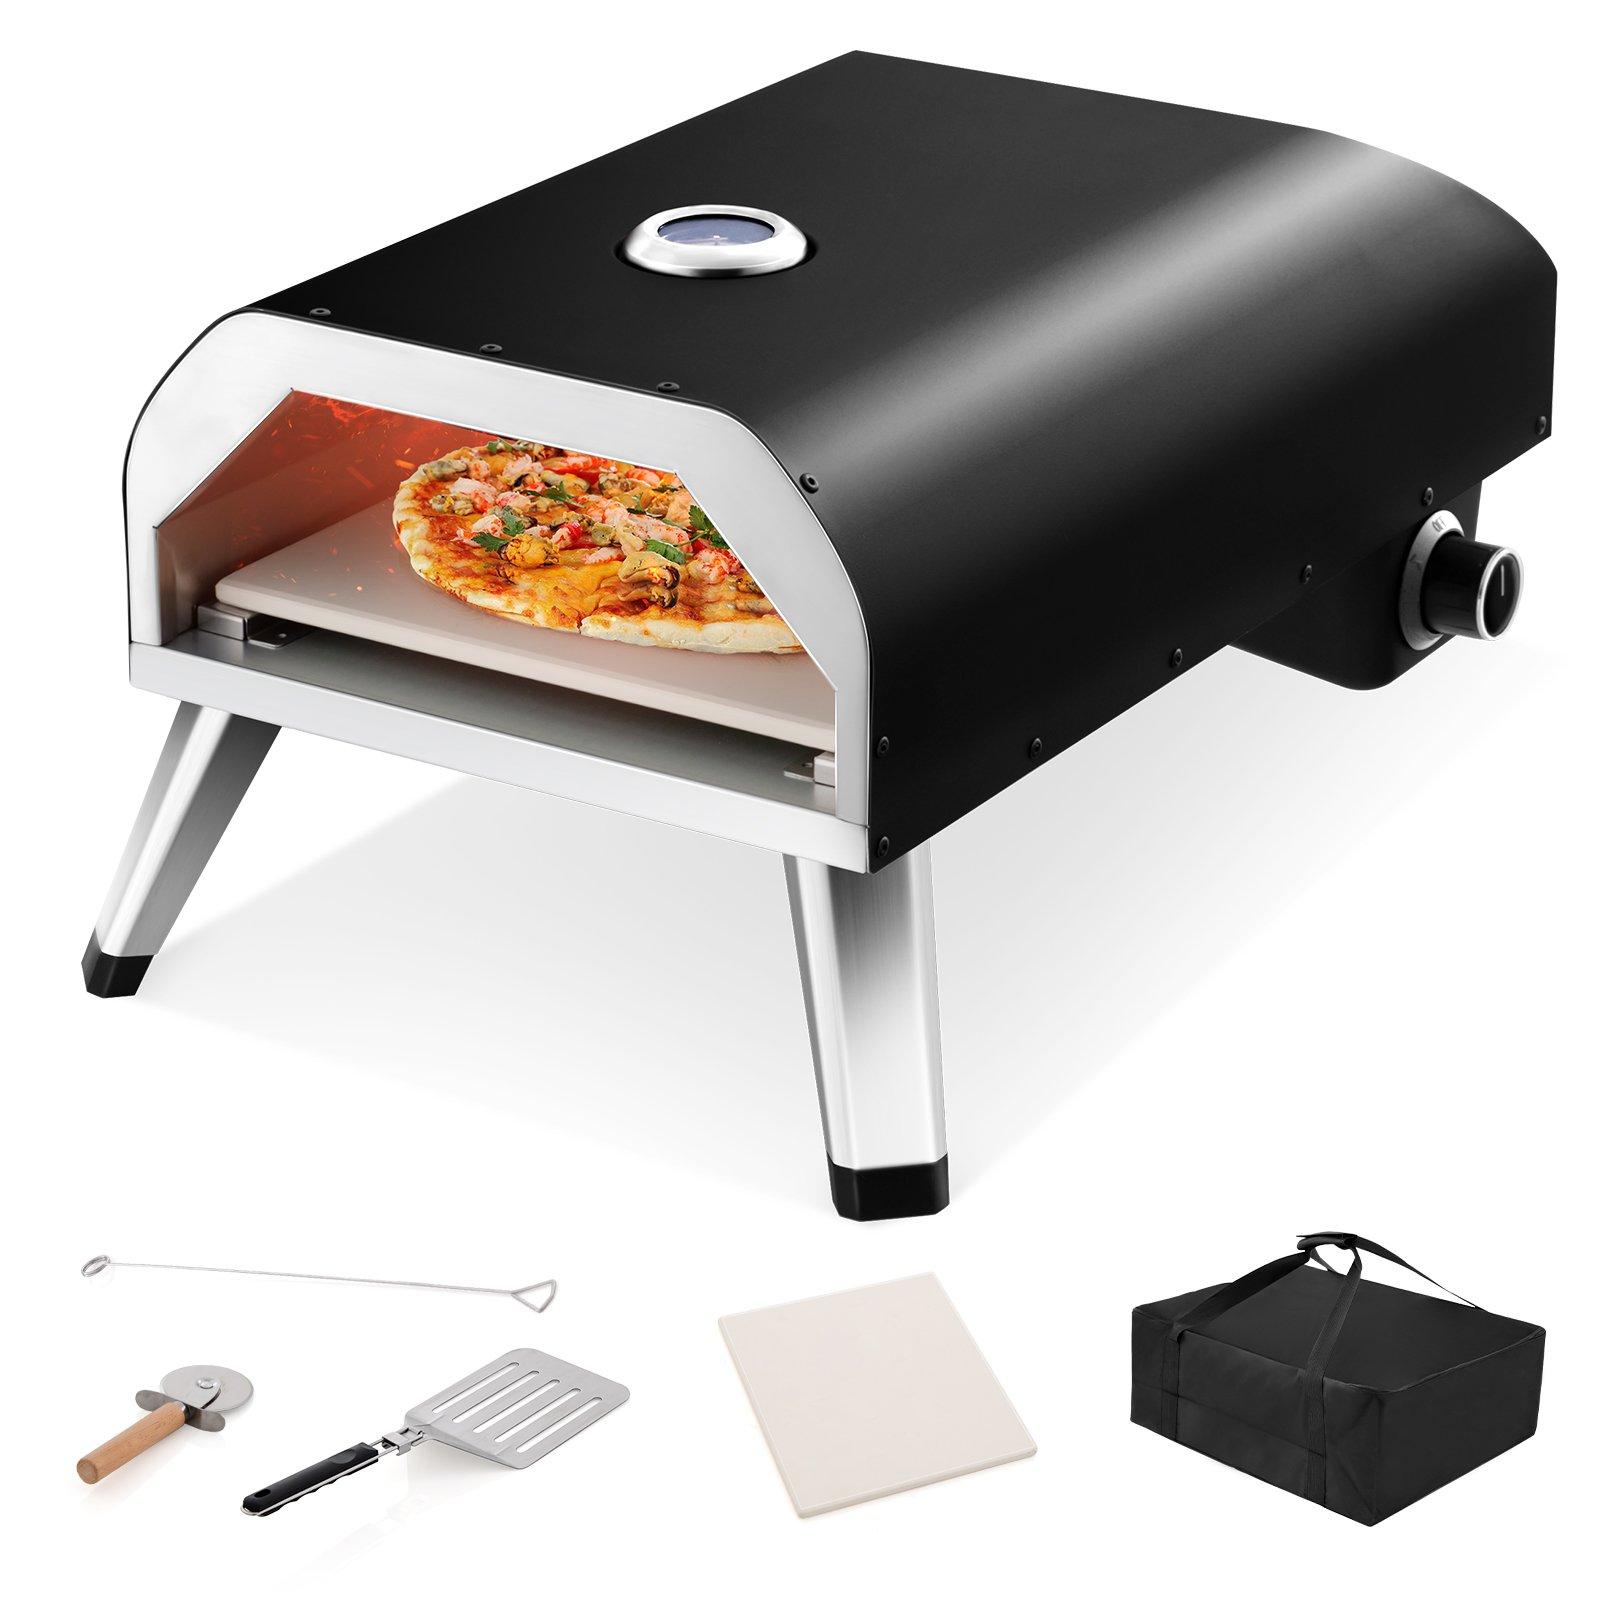 Stainless Steel Pizza Maker Backyard 4kW Foldable Pizza Oven Outdoor Cooking